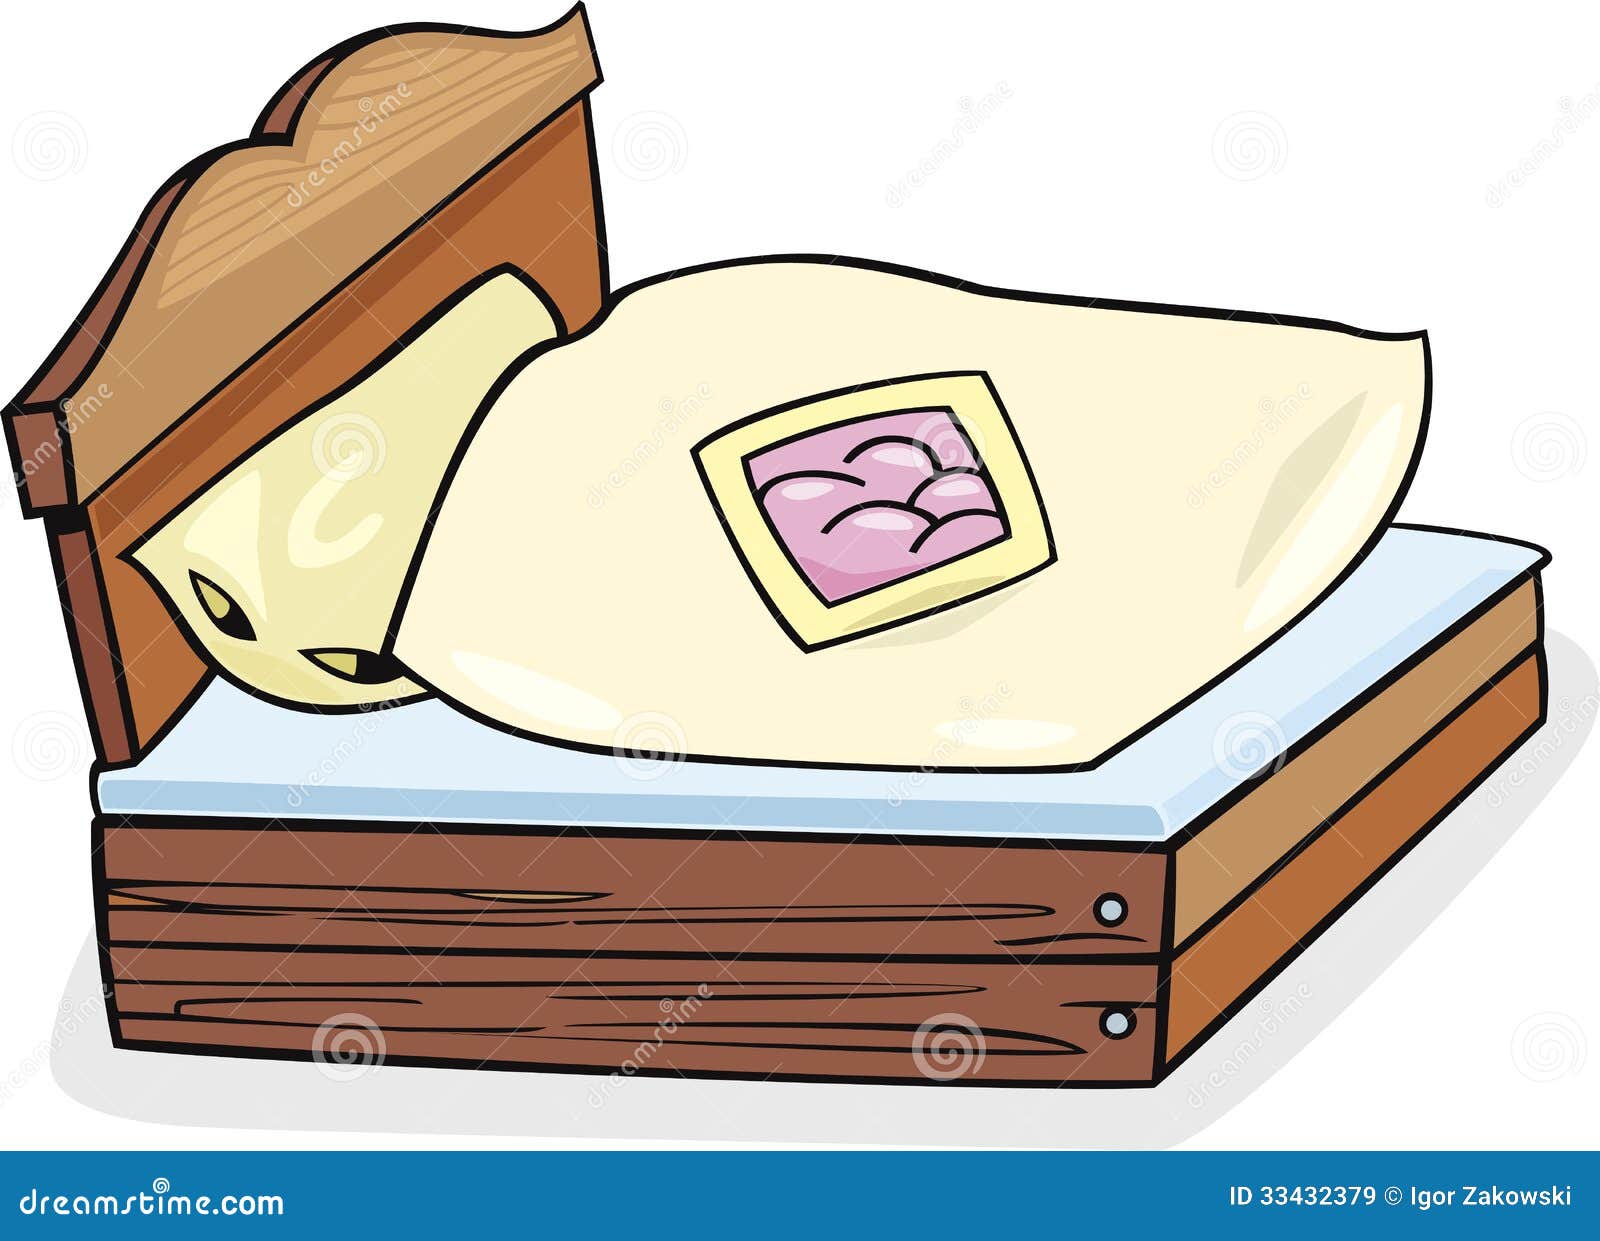 free clipart bedroom furniture - photo #25